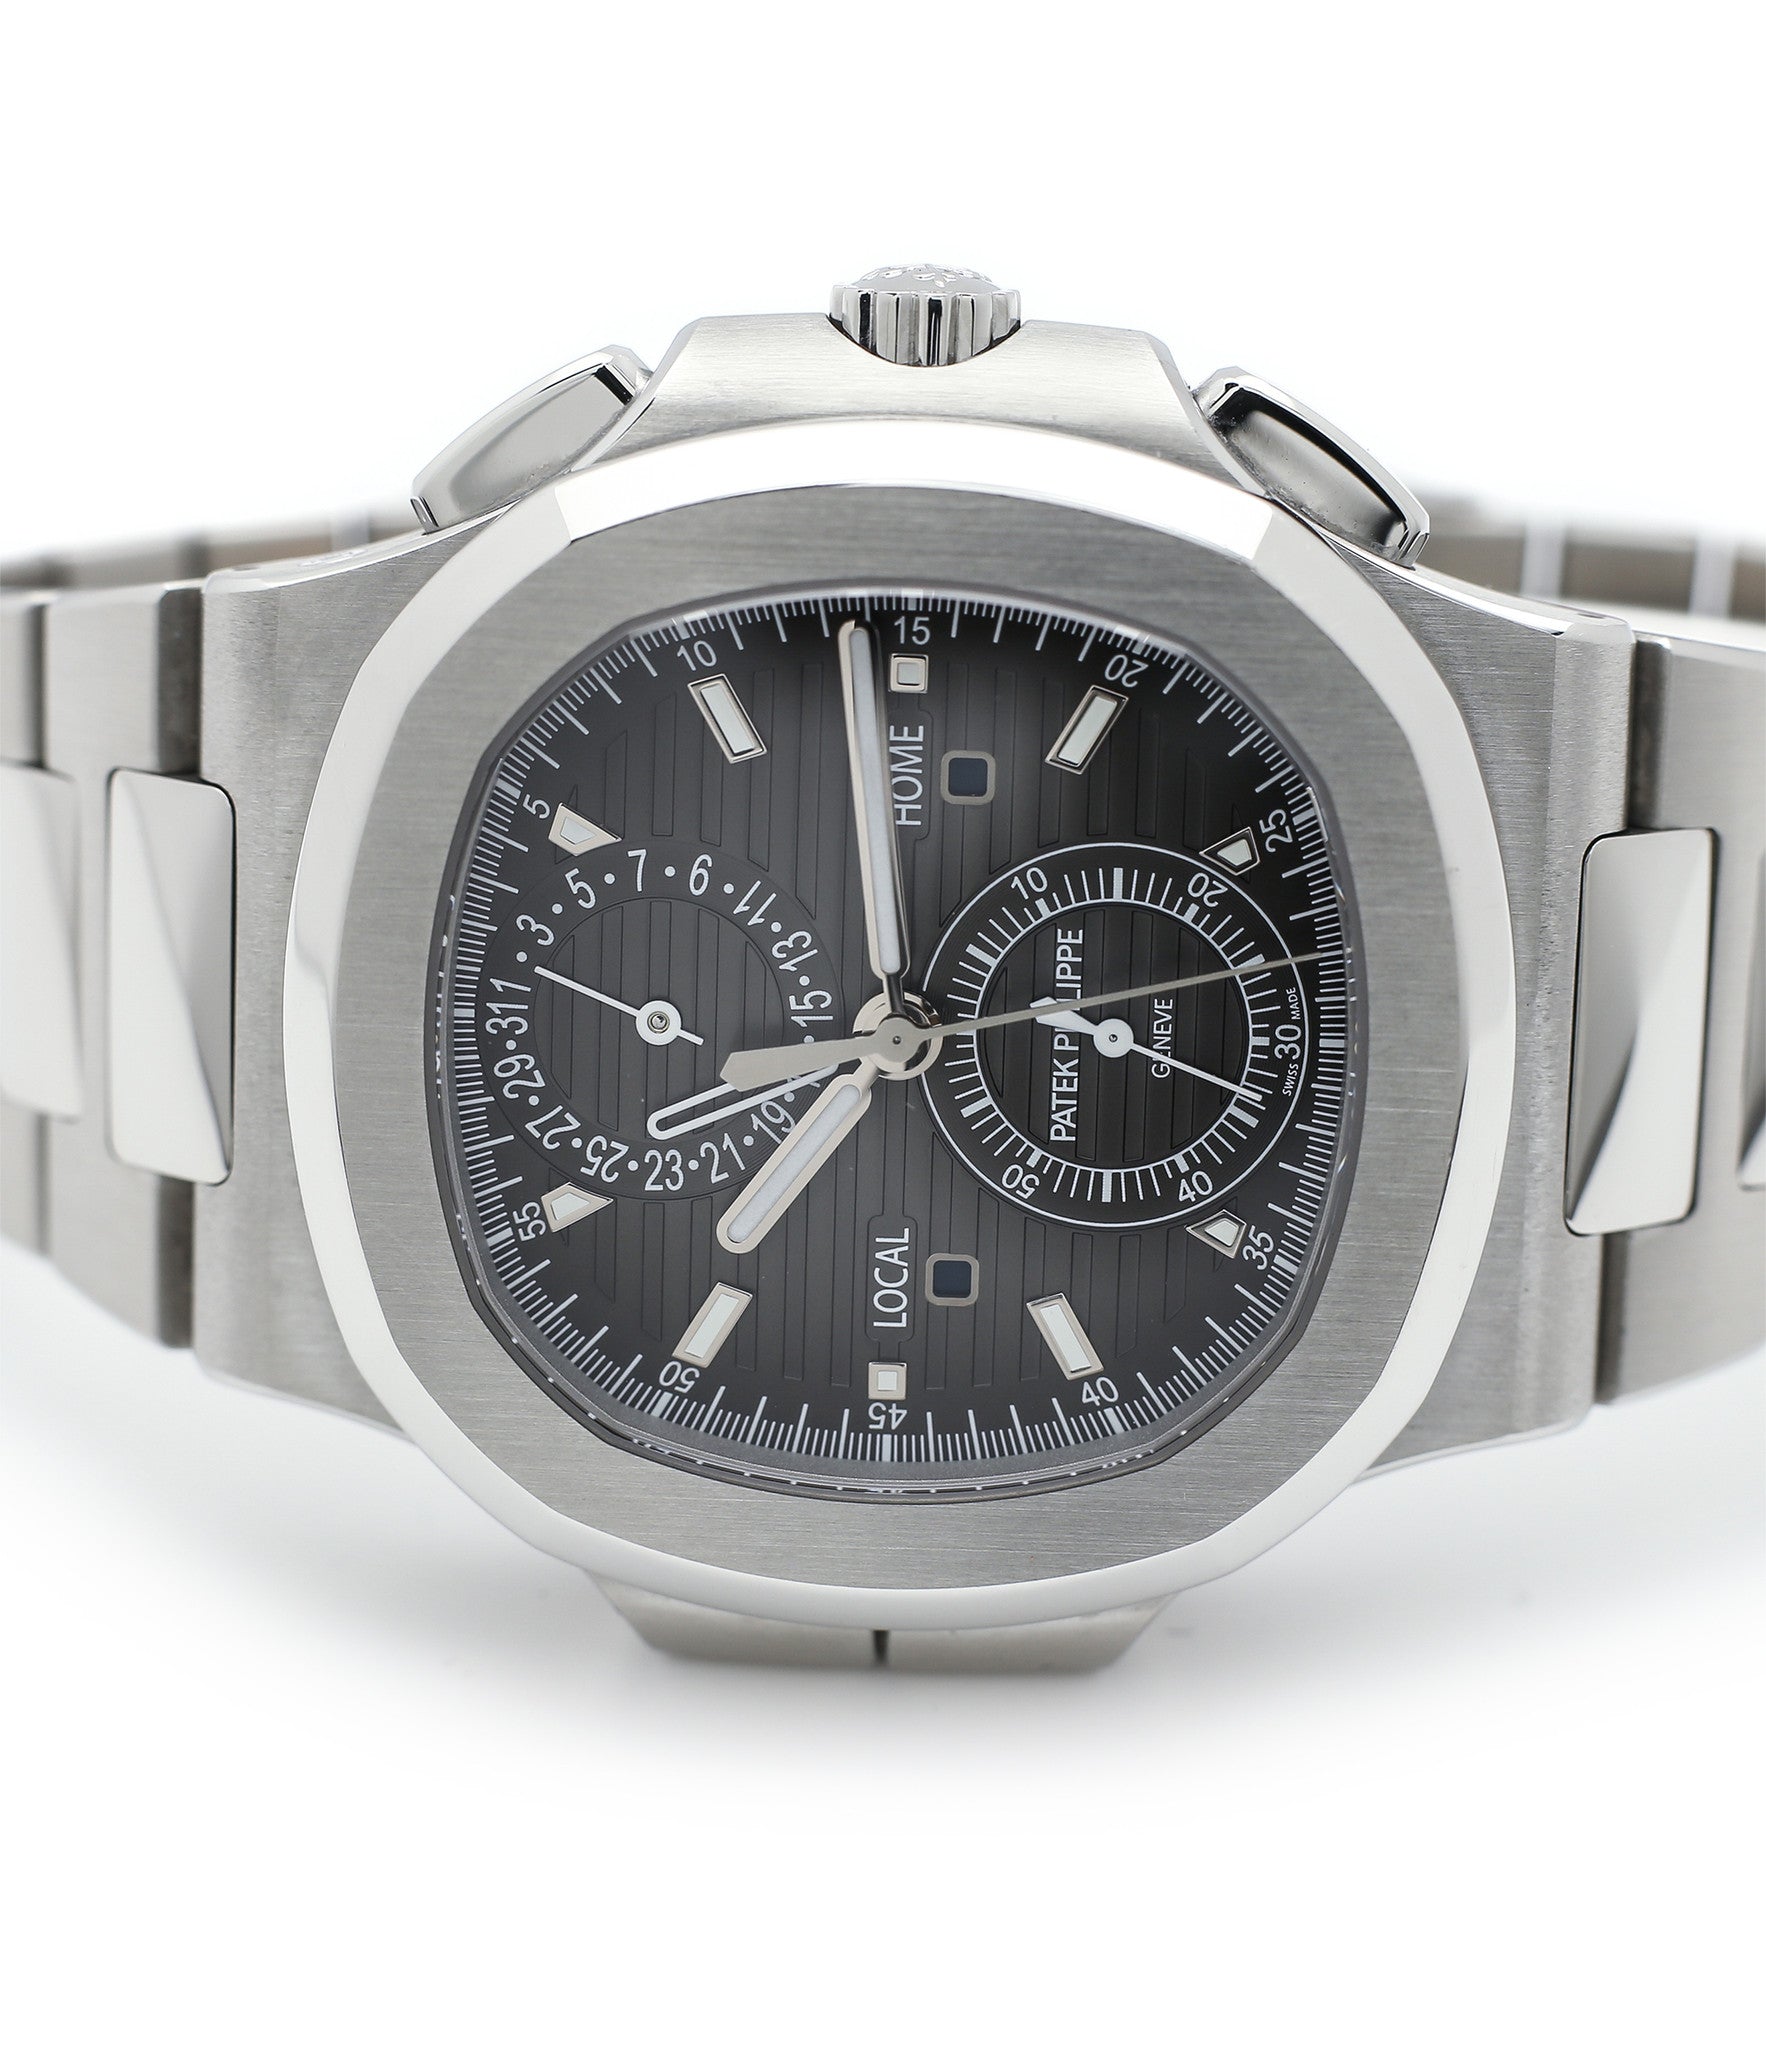 dial Patek Philippe Nautilius Travel-Time Chronograph 5990 steel pre-owned job full set from 2016 for sale online WATCH XCHANGE London with authenticity guaranteed